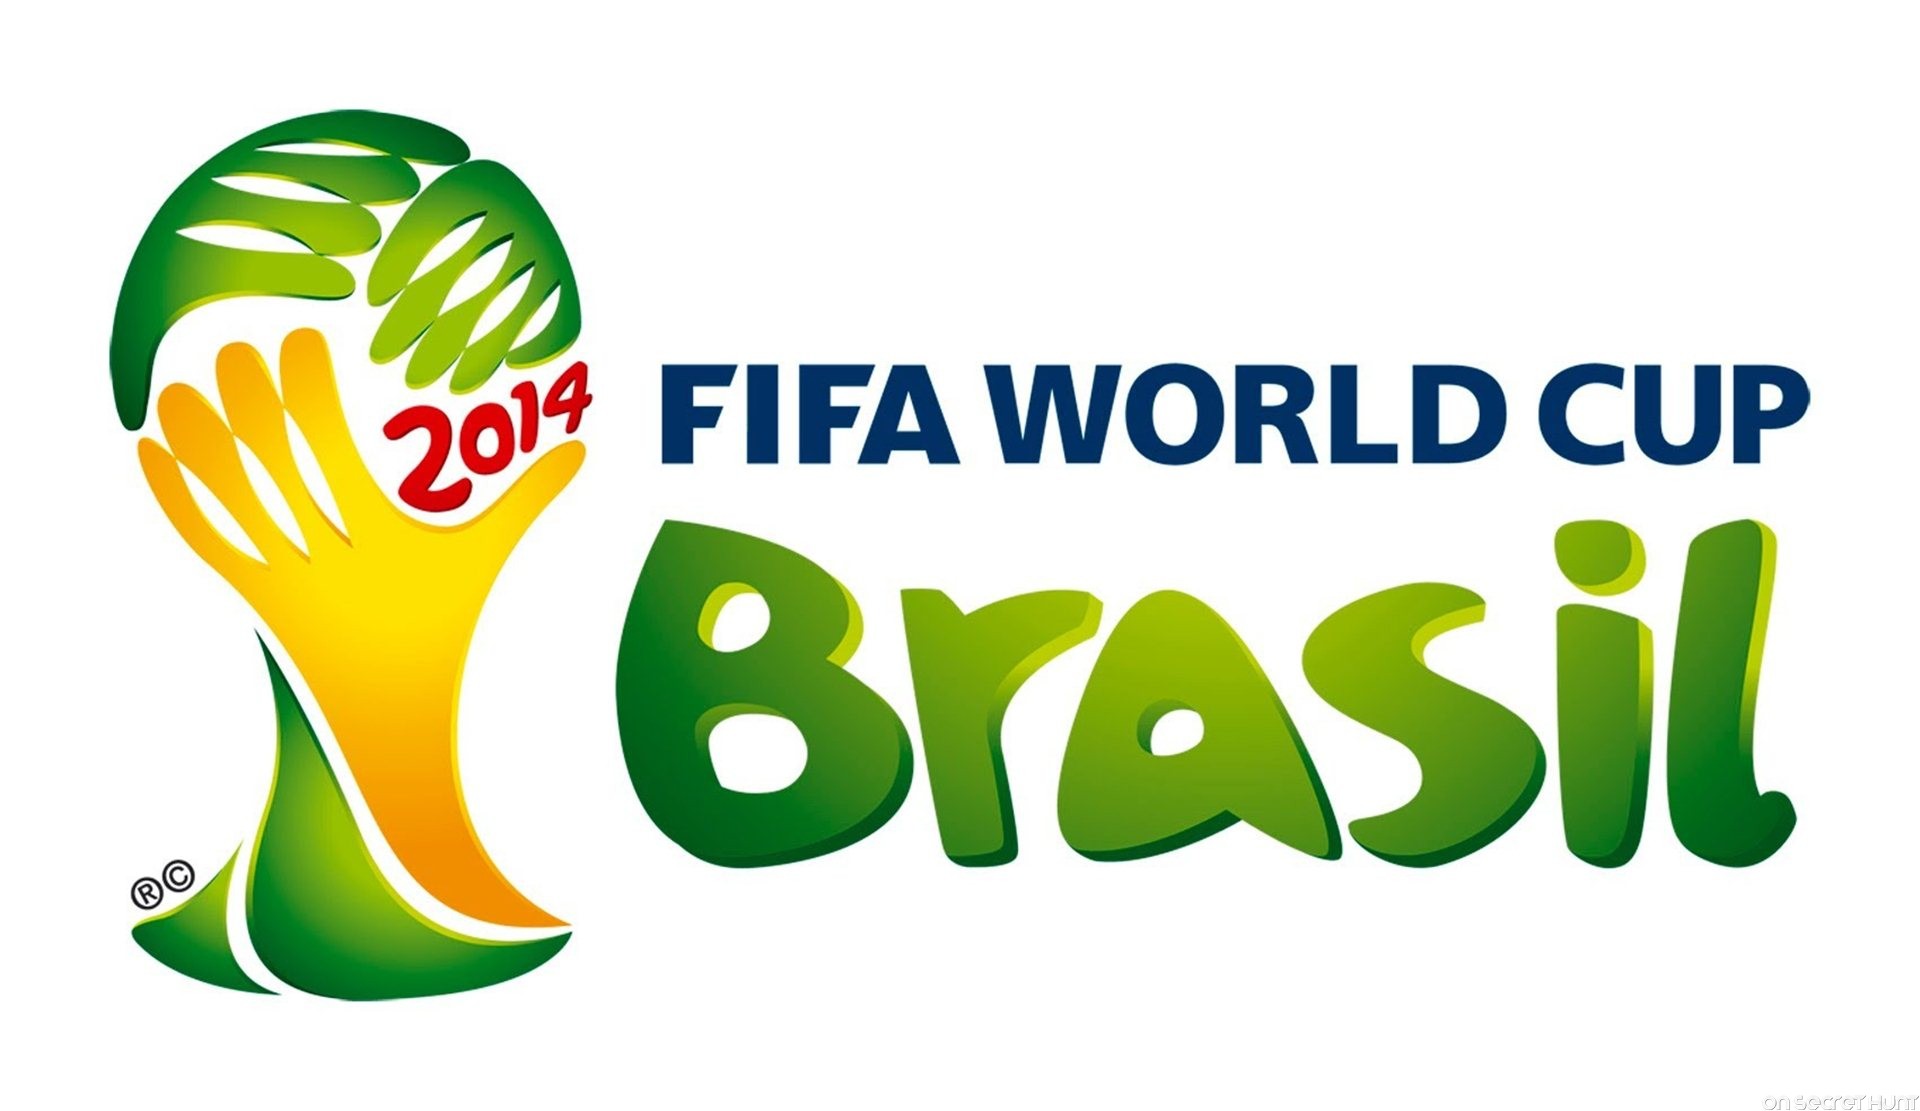 World Cup 2014 – Brazilian Dishes To Look Out For